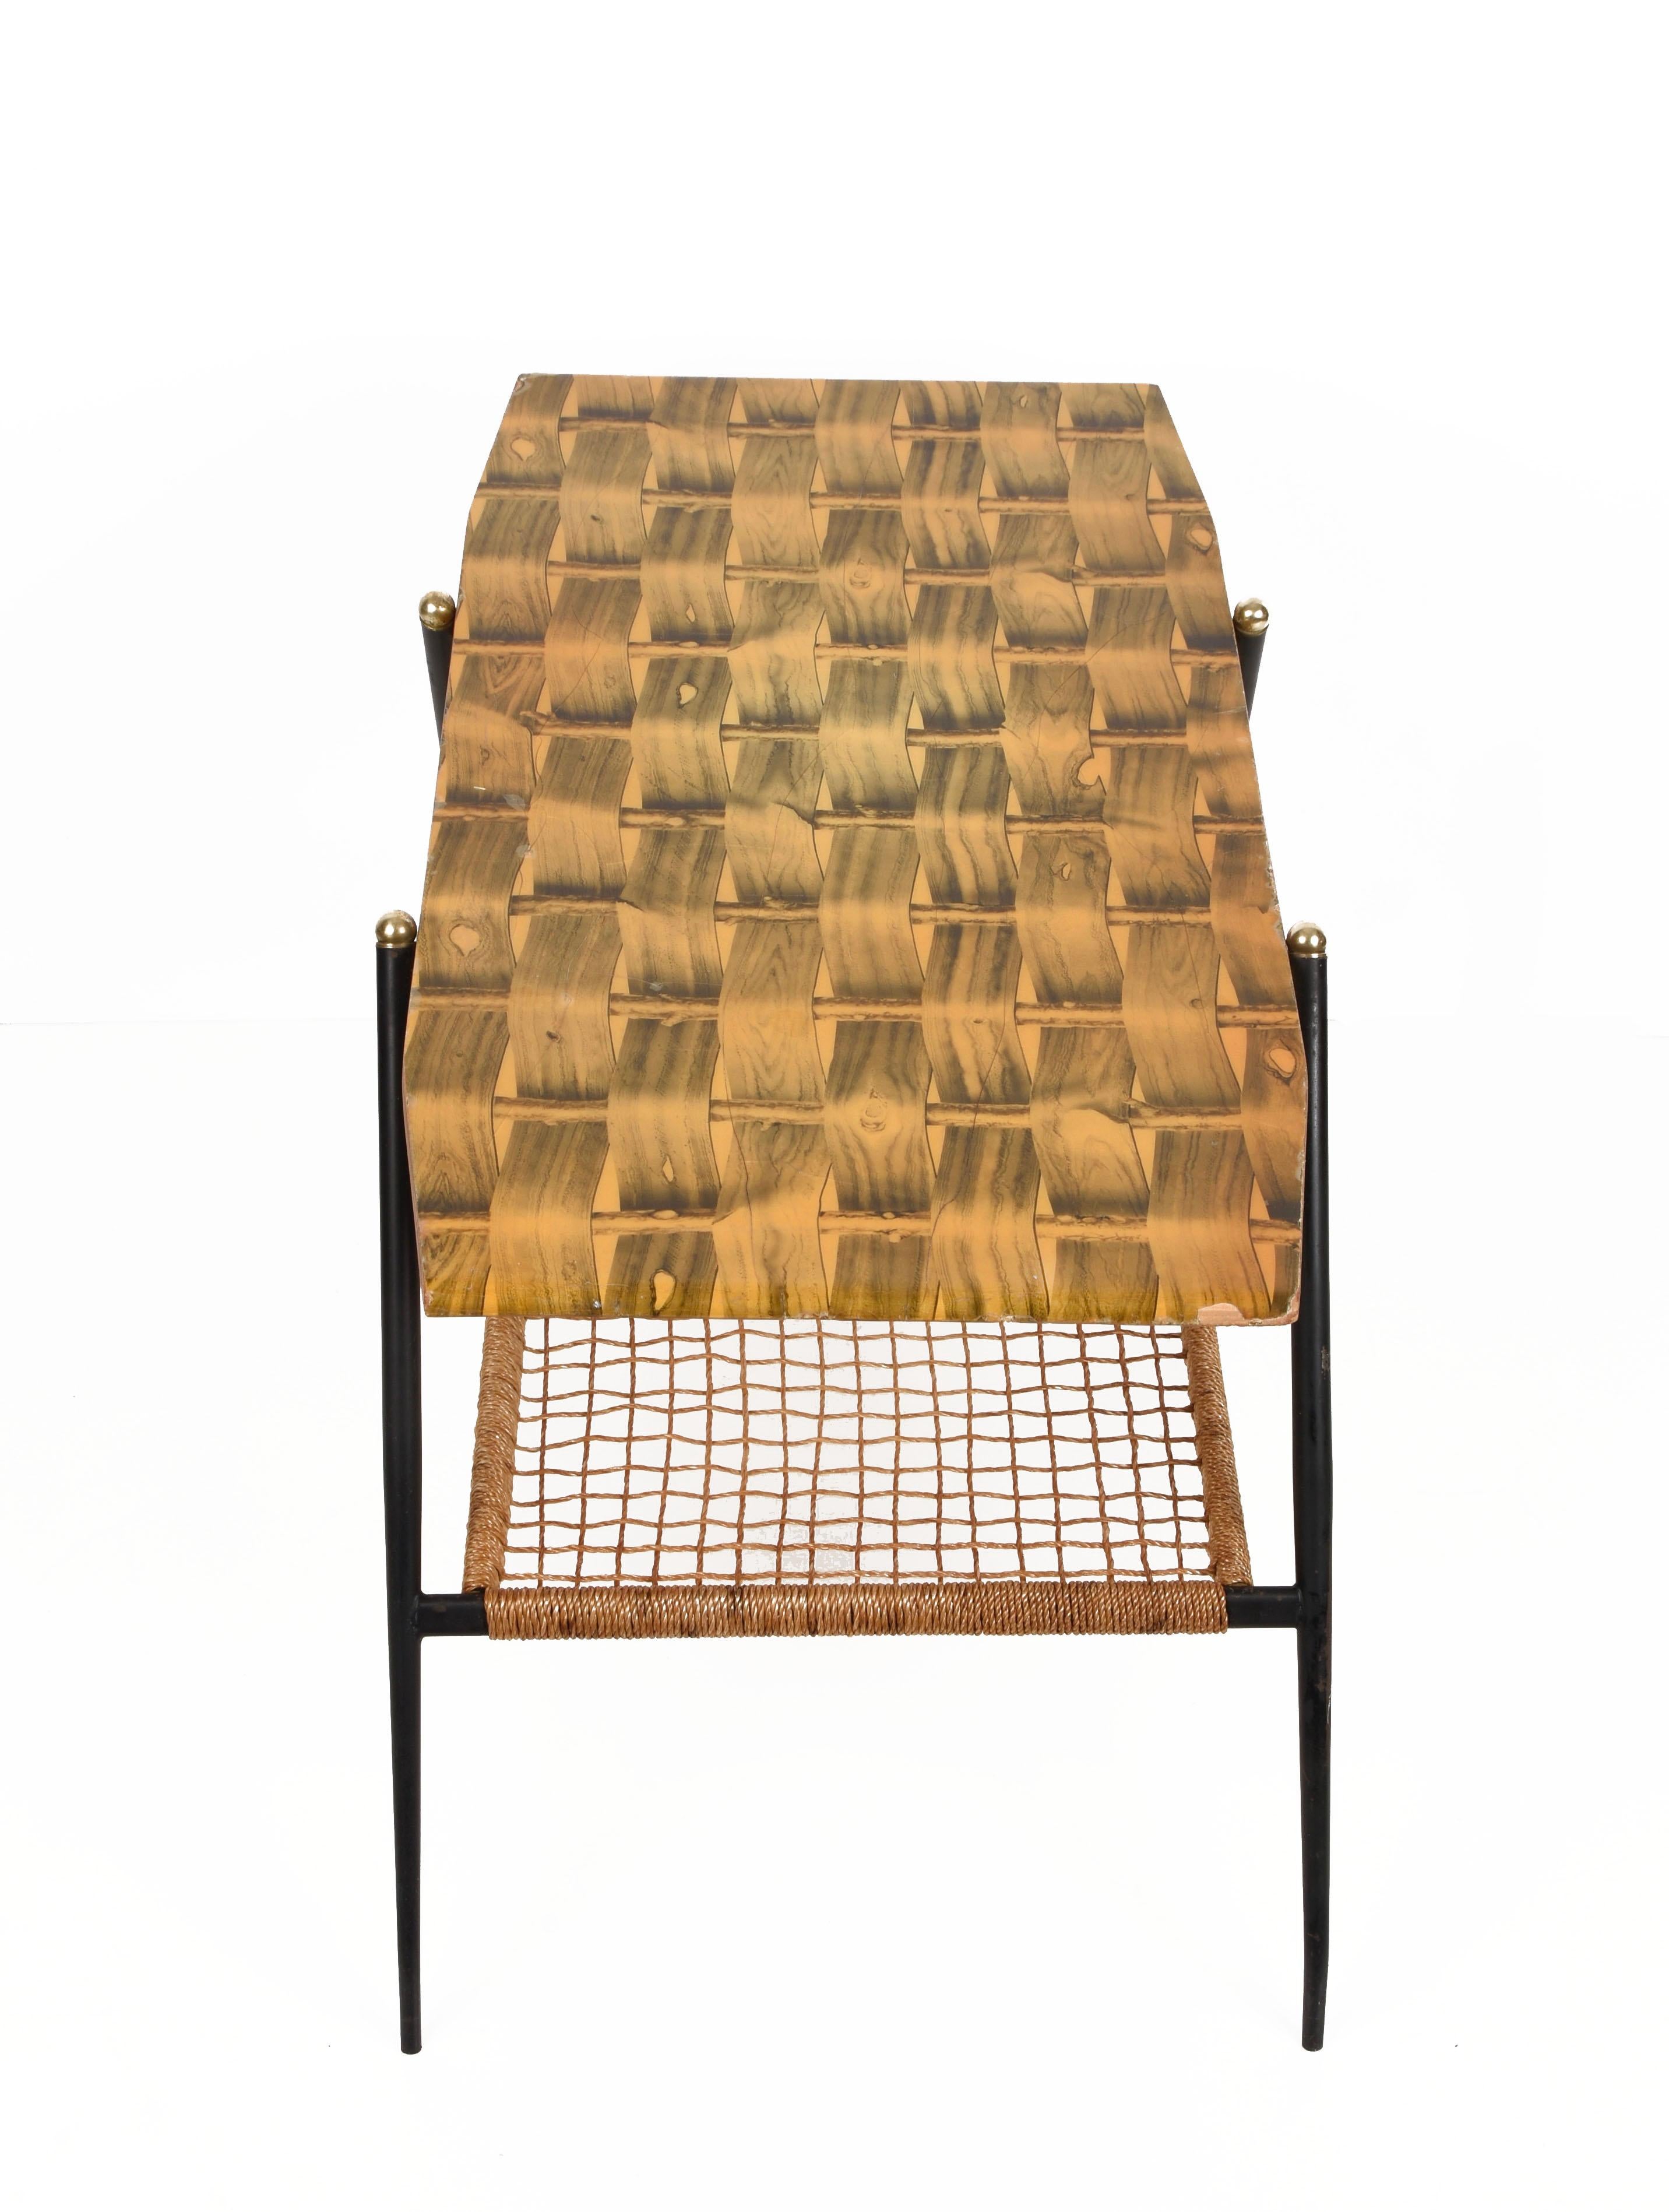 Midcentury Wood and Metal Italian Coffee Table with Brass Magazine Rack, 1950s For Sale 3